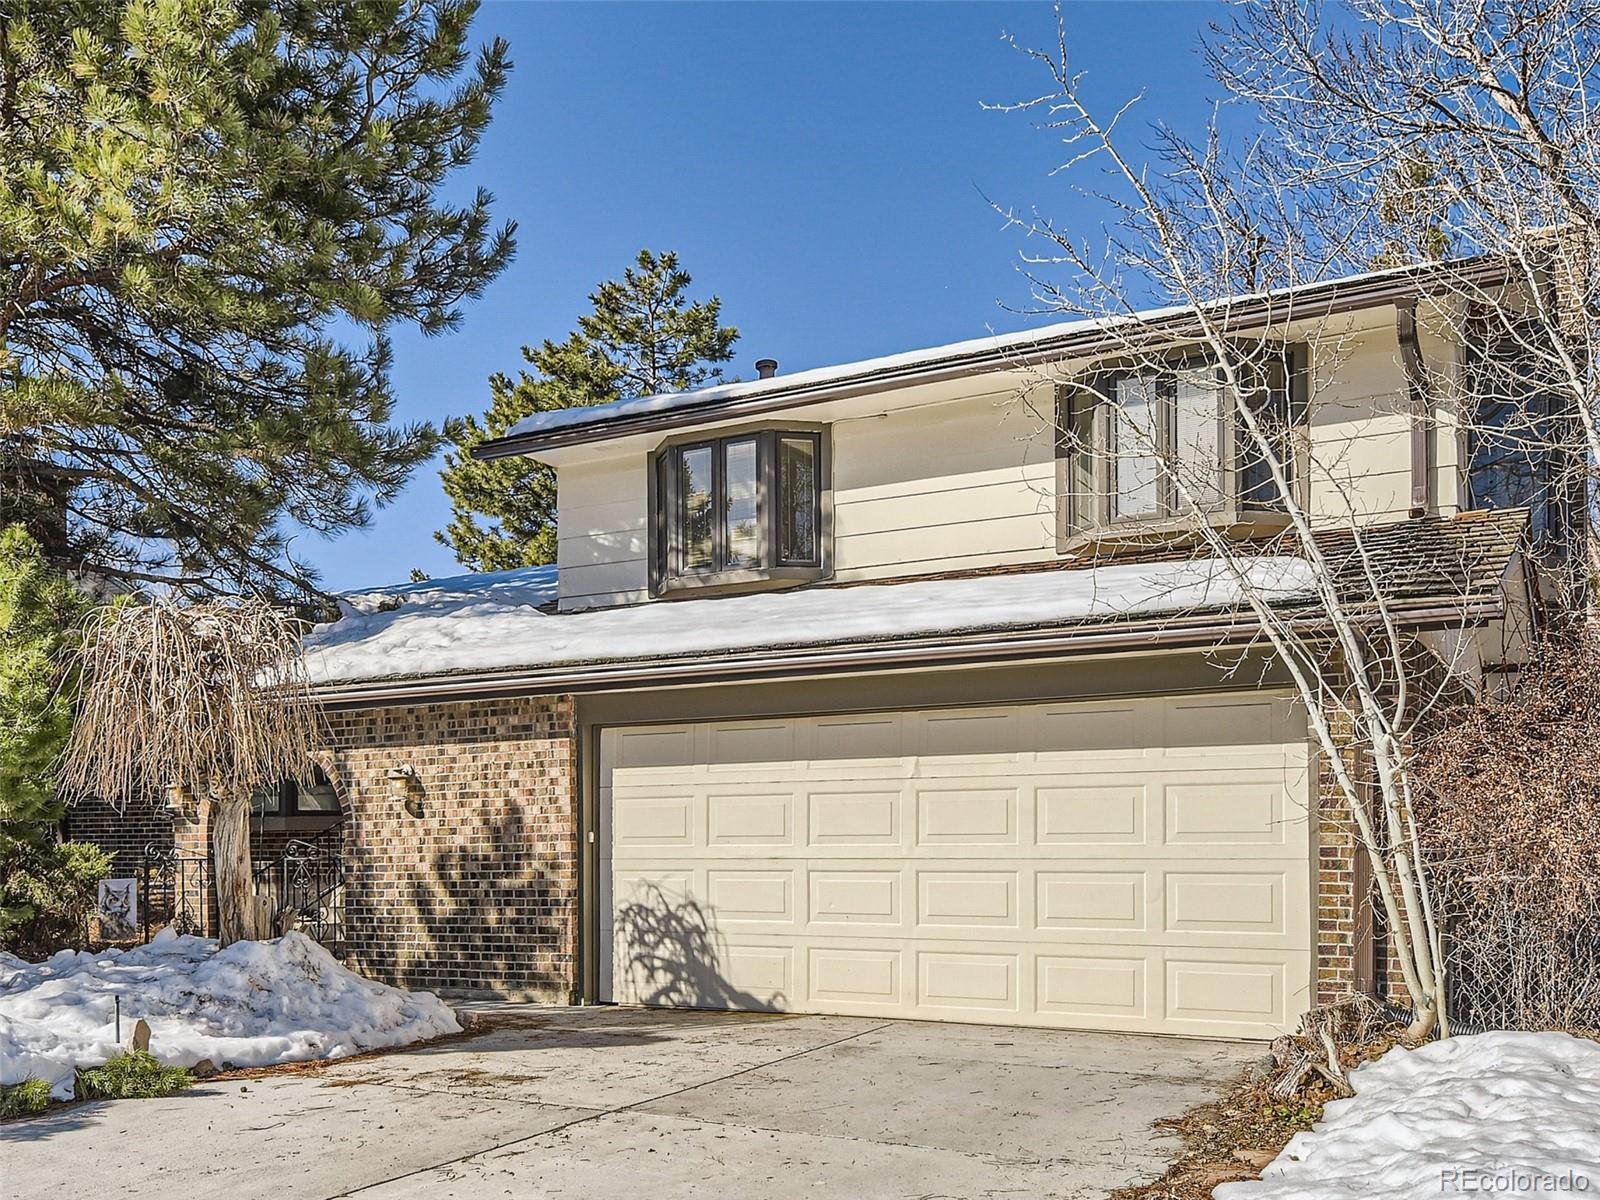 13569  antares drive, Littleton sold home. Closed on 2024-04-23 for $575,000.